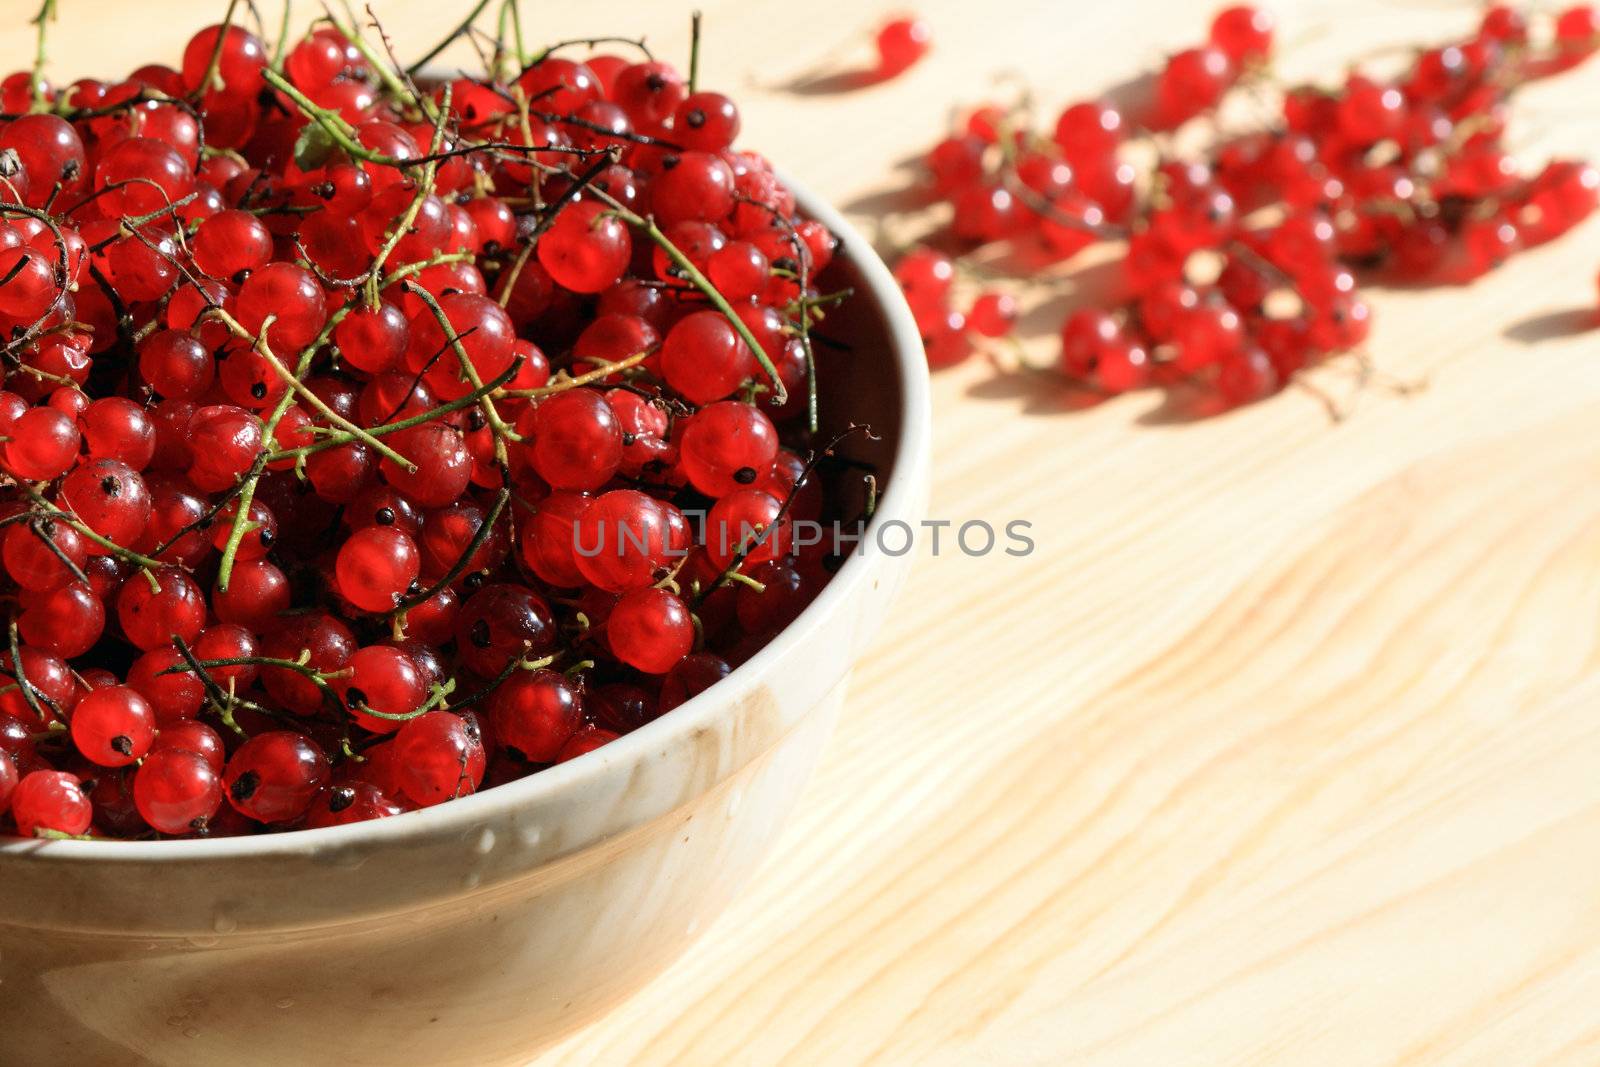 Red currants in a bowl by kvkirillov